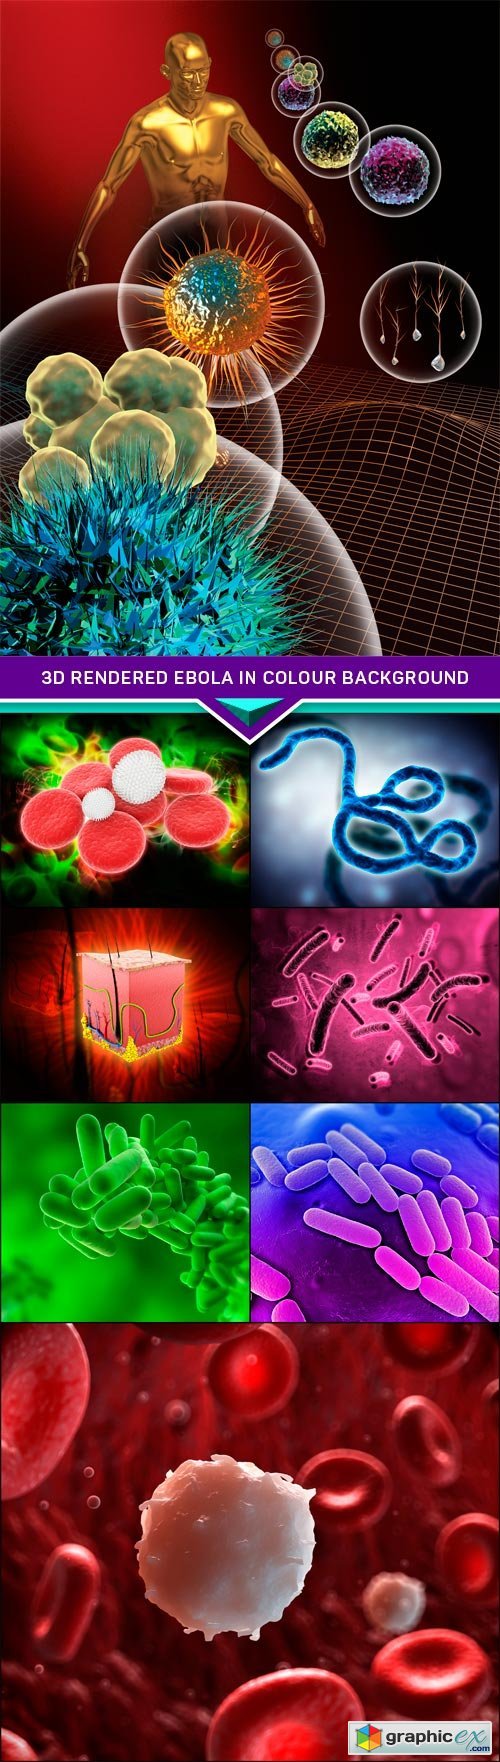 3d rendered Ebola in colour background 8x JPEG